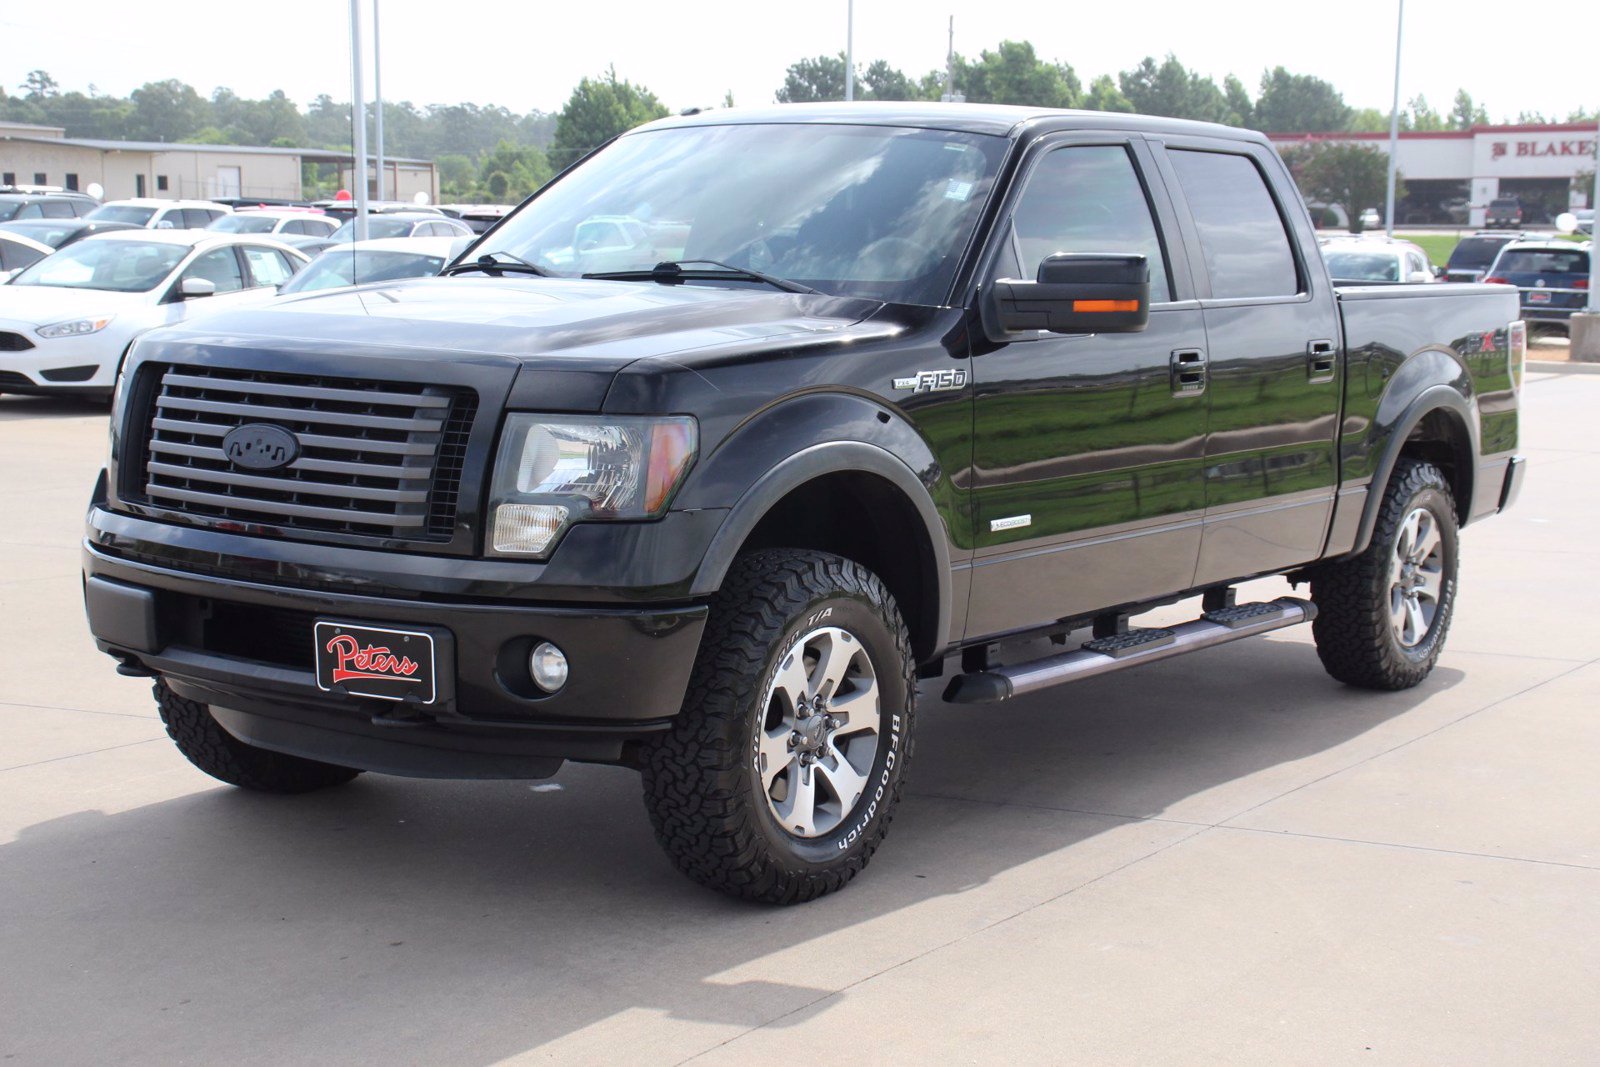 Pre-Owned 2011 Ford F-150 FX4 4D SuperCrew in Longview #9087PA | Peters 2011 Ford F 150 Fx4 5.0 Towing Capacity